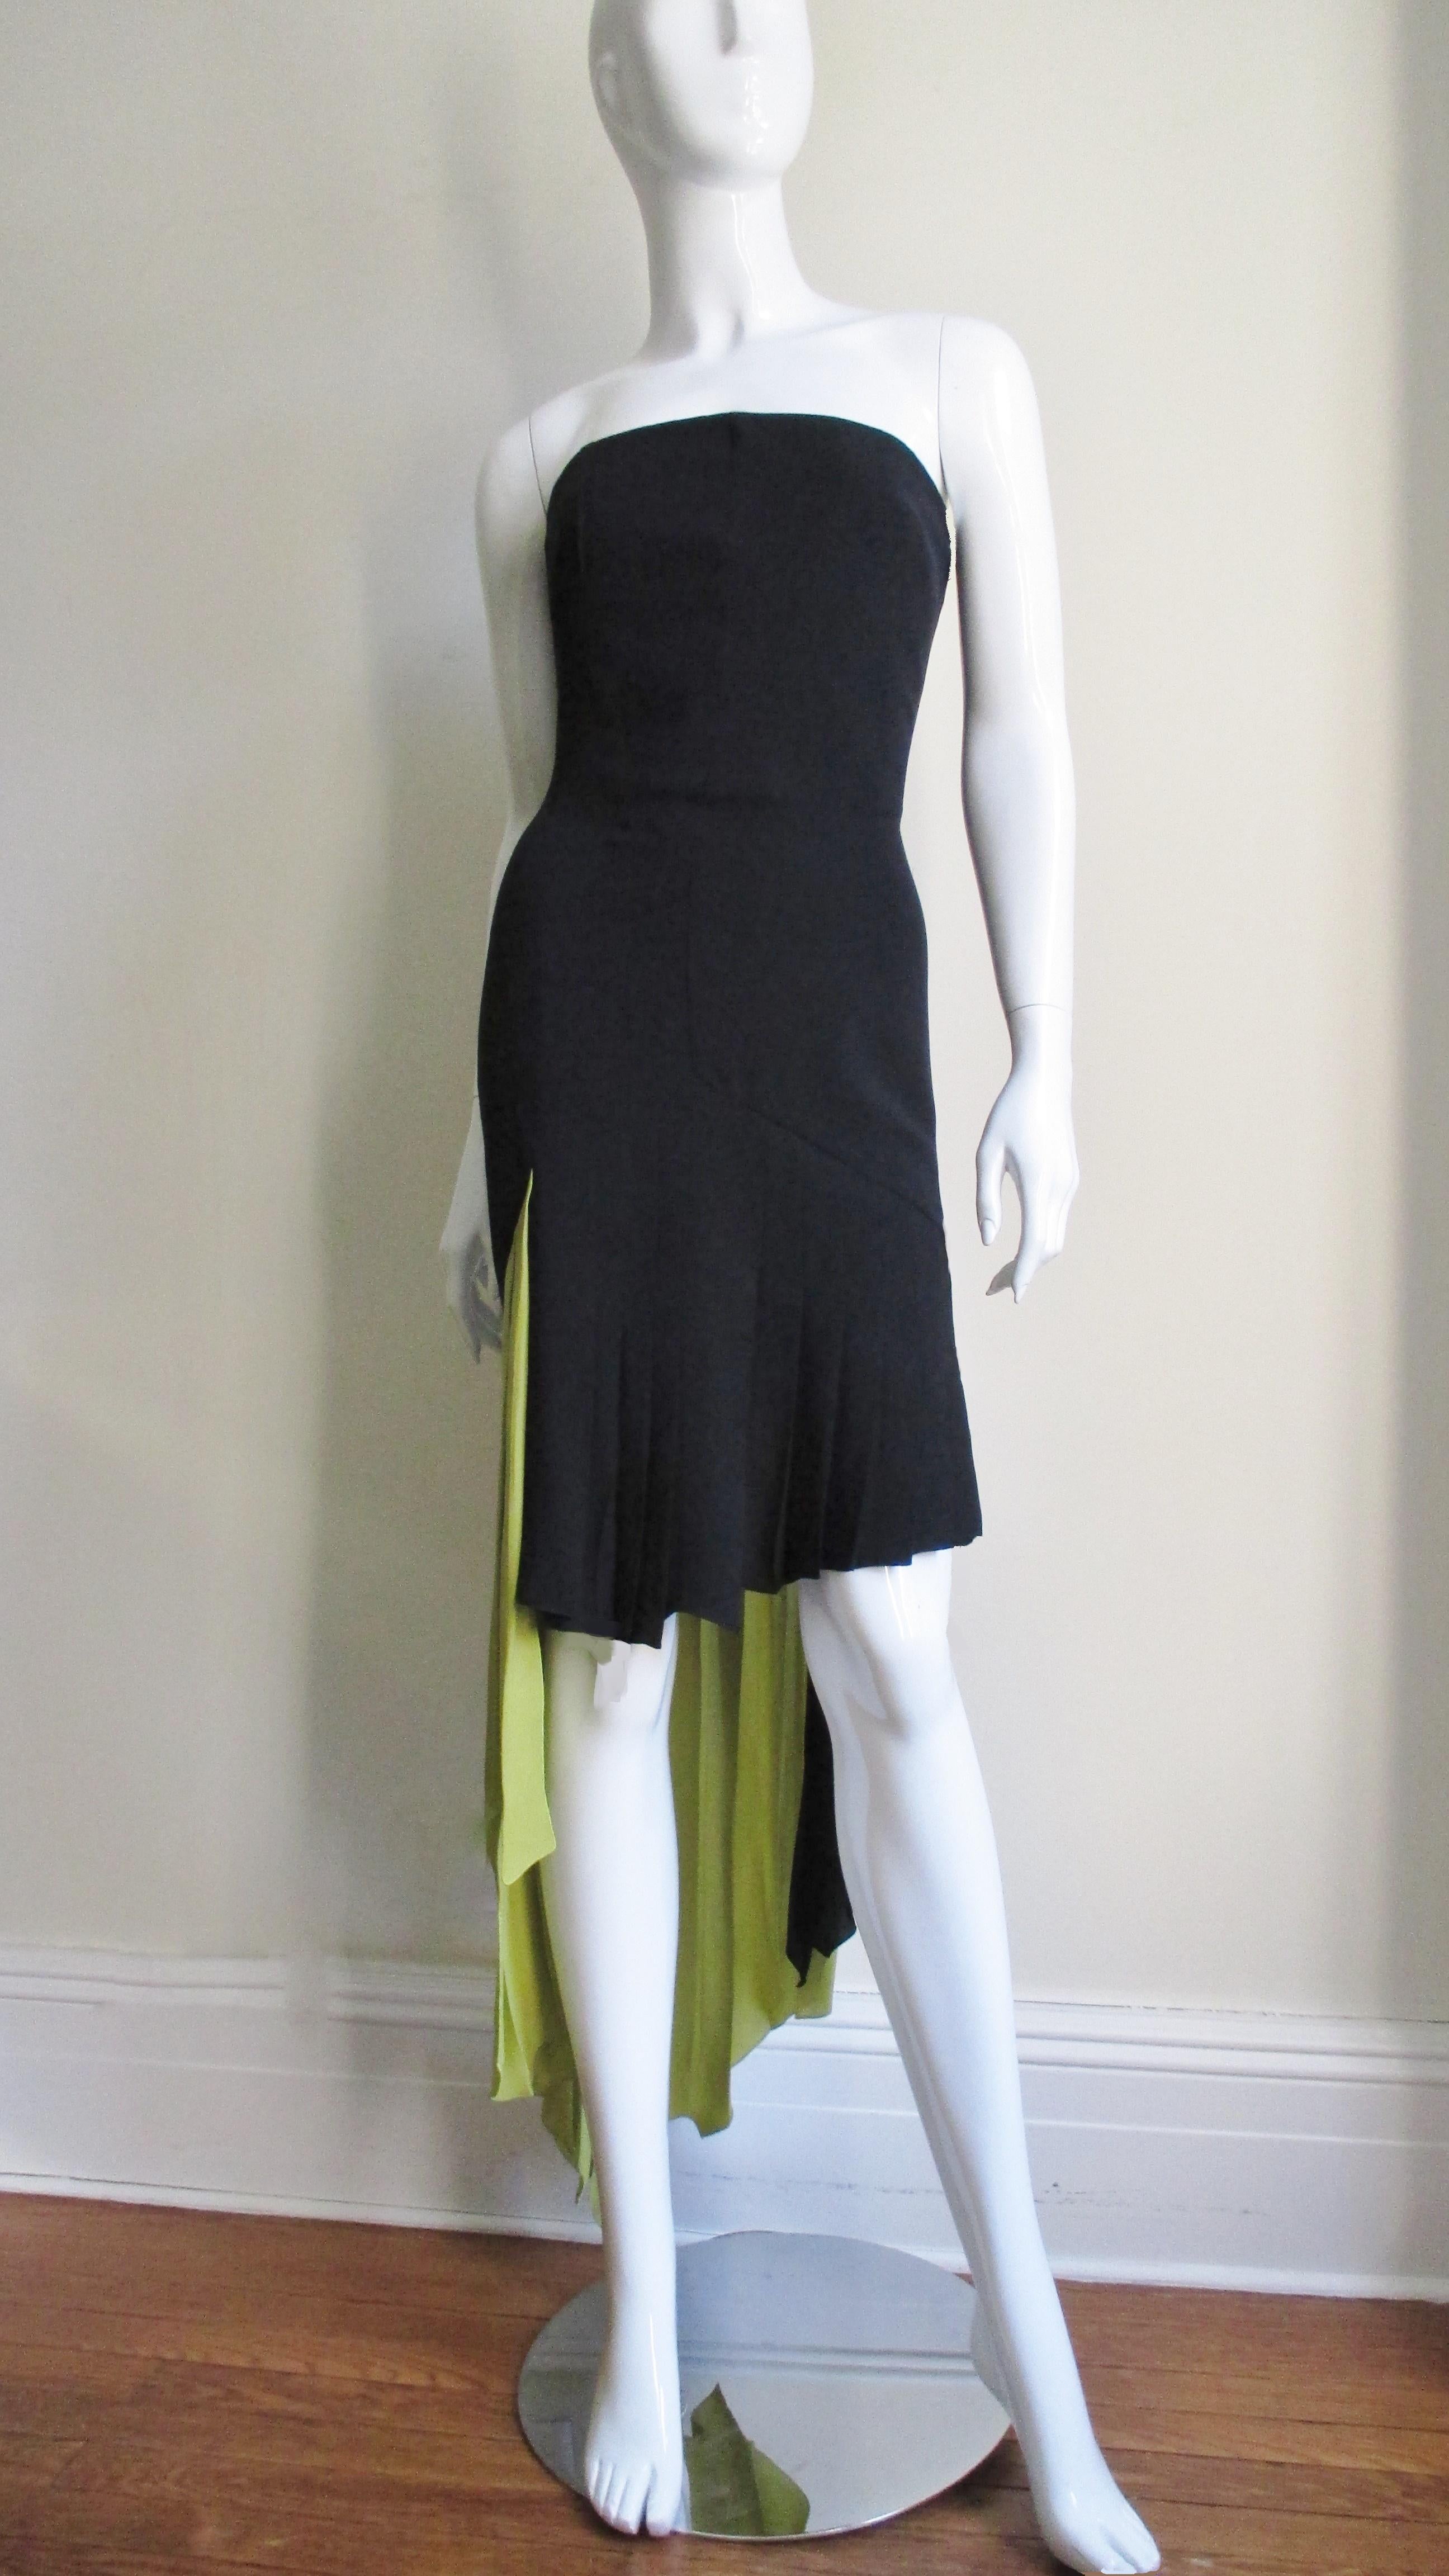 A silk bustier color block dress in black and lime green with a high low asymmetrical pleated hemline from Gianni Versace. The strapless dress has an inner boned corset for support. It is semi fitted through to the hips then falls in varying lengths